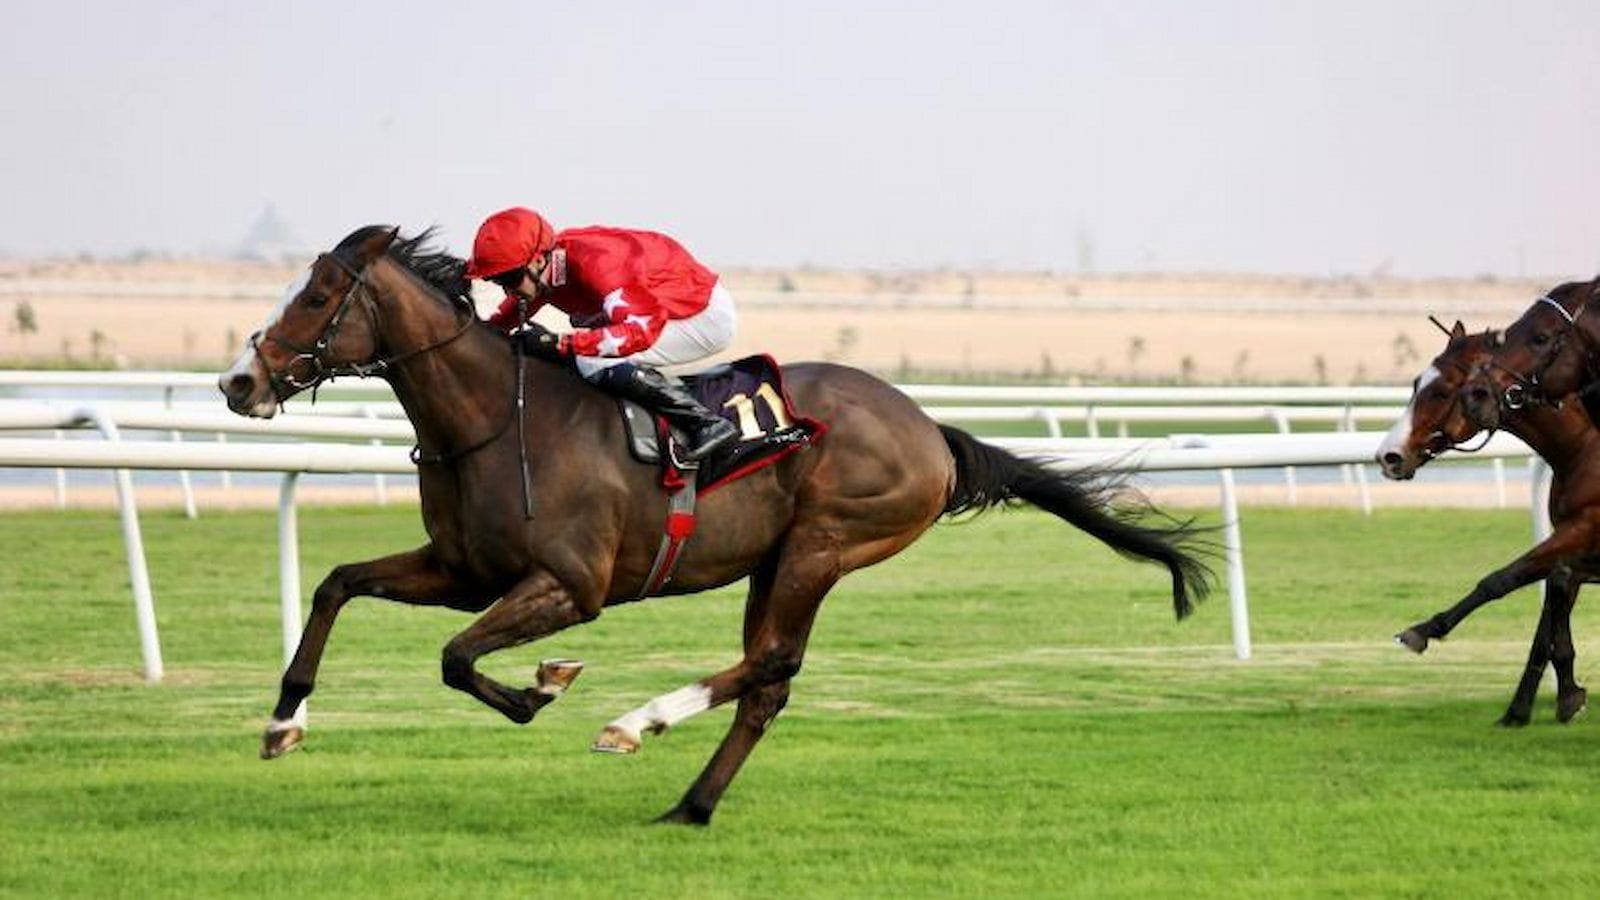 Spirit Dancer is reported to be in excellent condition leading up to the Dubai Sheema Classic